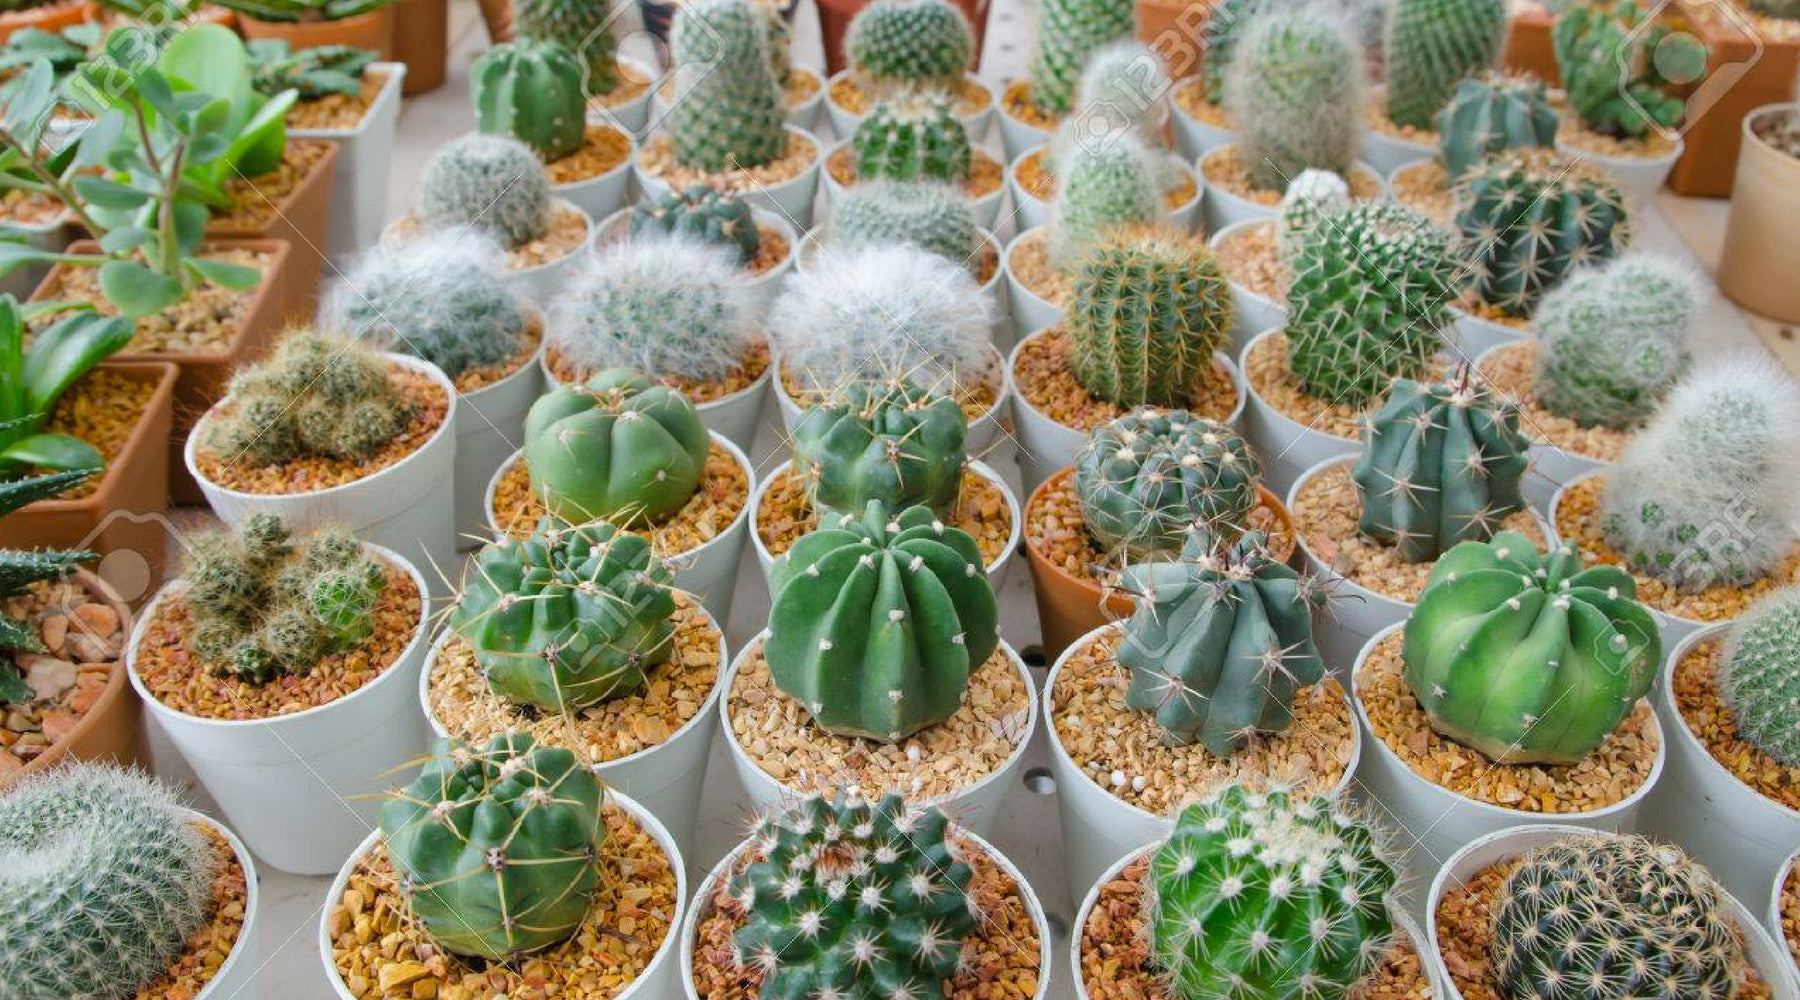 Introduction to Home Desert Cactus